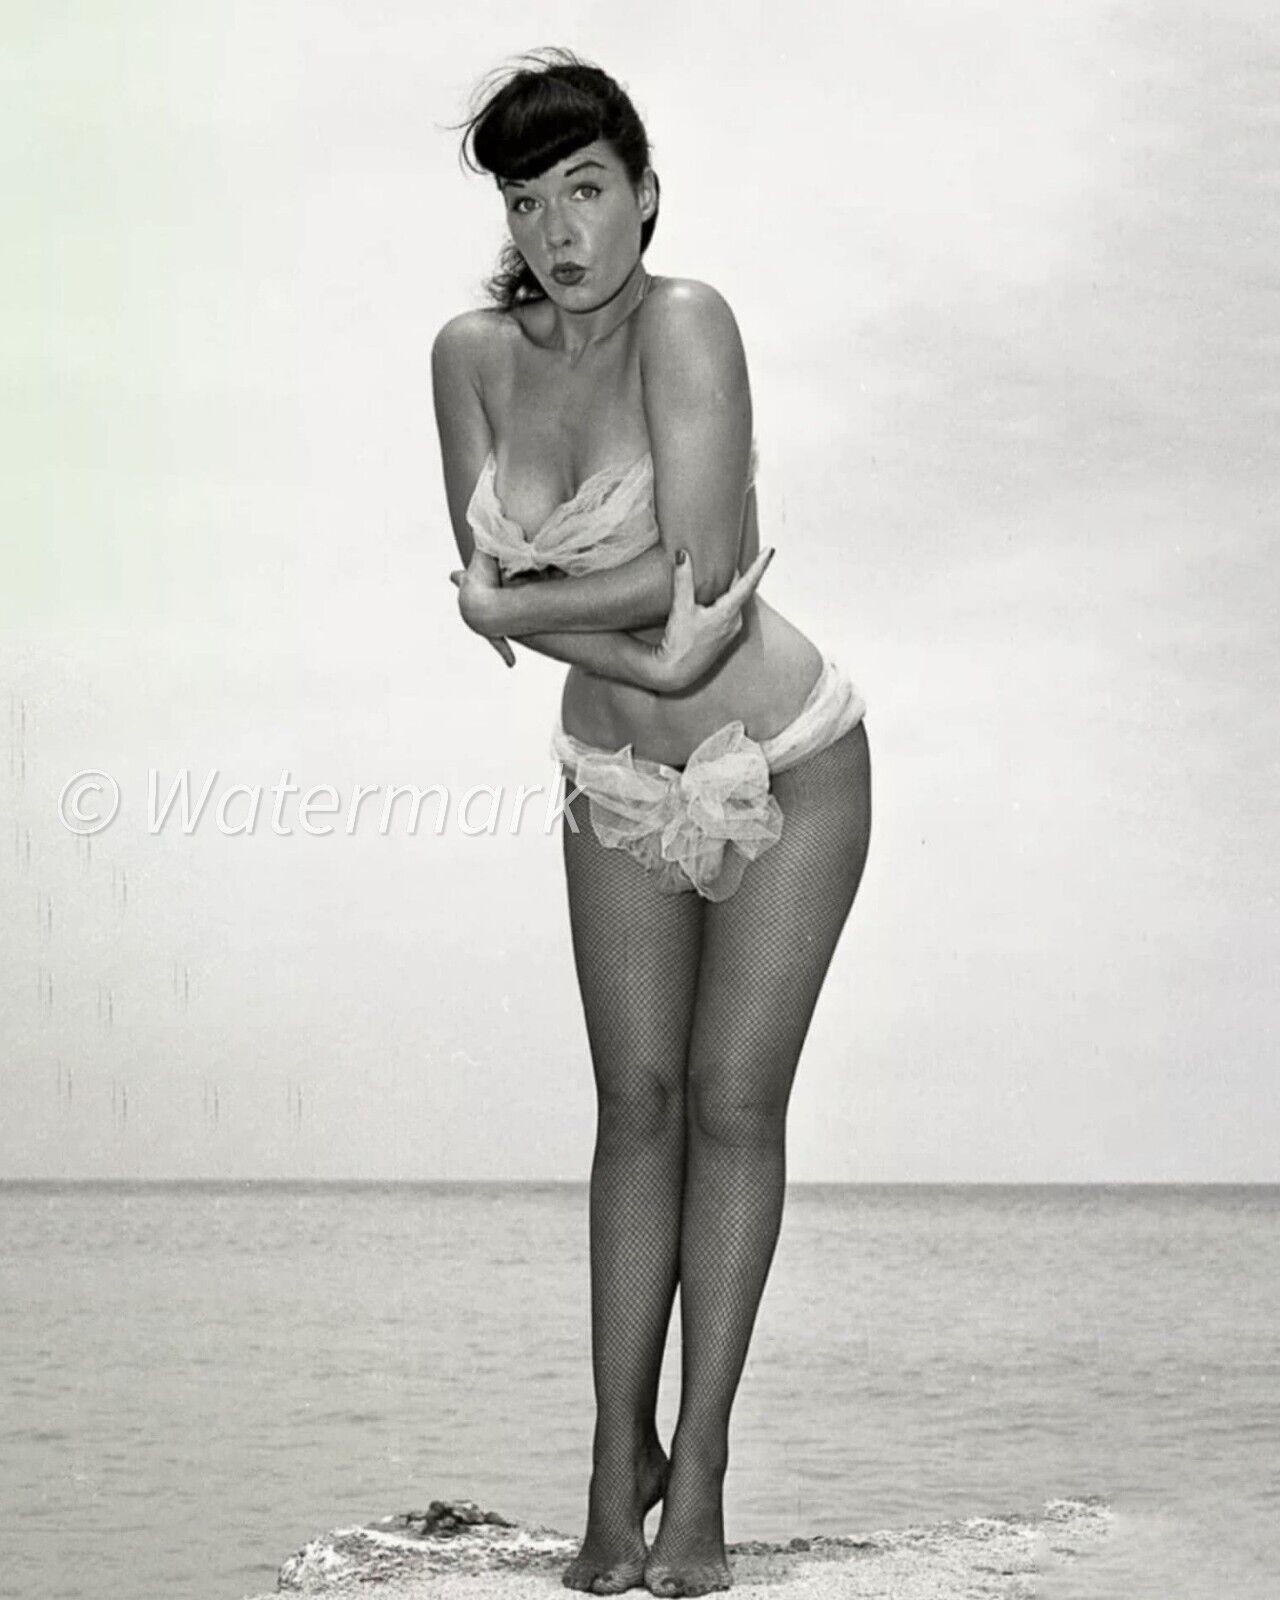 5x7 PUBLICITY PHOTO - BETTIE PAGE PIN UP VINTAGE  - 1950s Actress Model